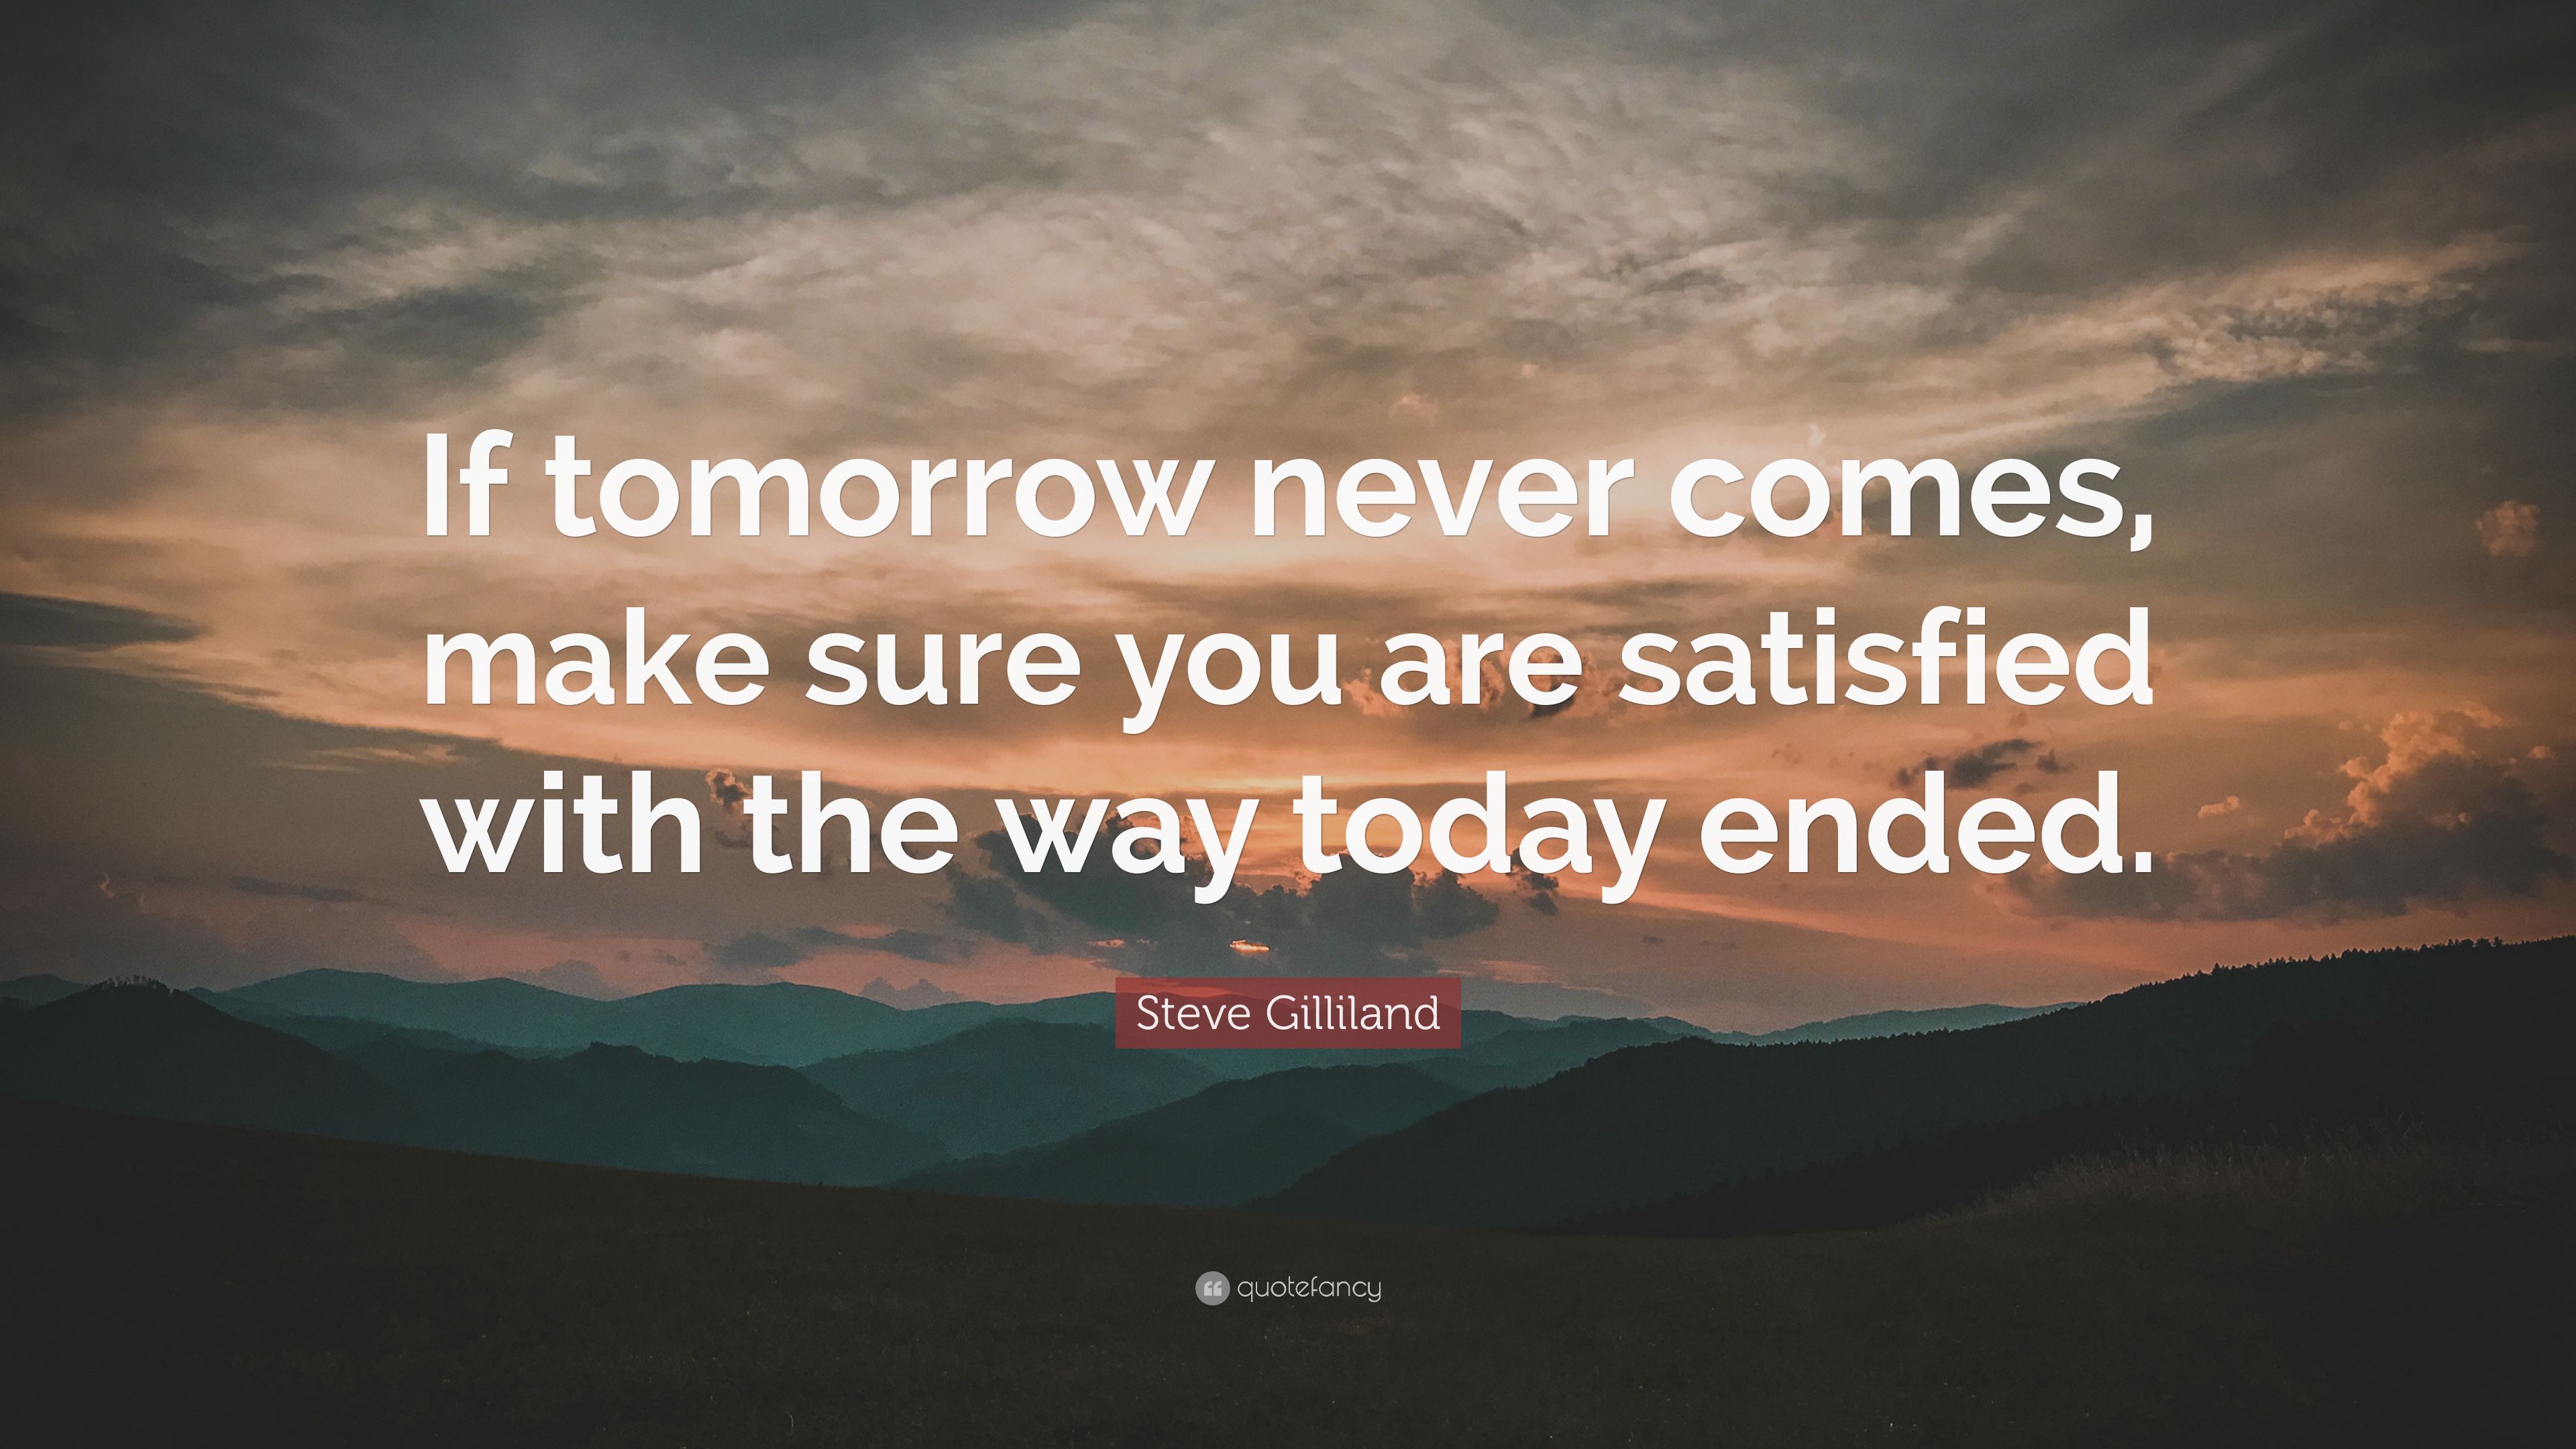 Steve Gilliland Quote: “If tomorrow never comes, make sure you are satisfied with the way today ended.” (5 wallpaper)